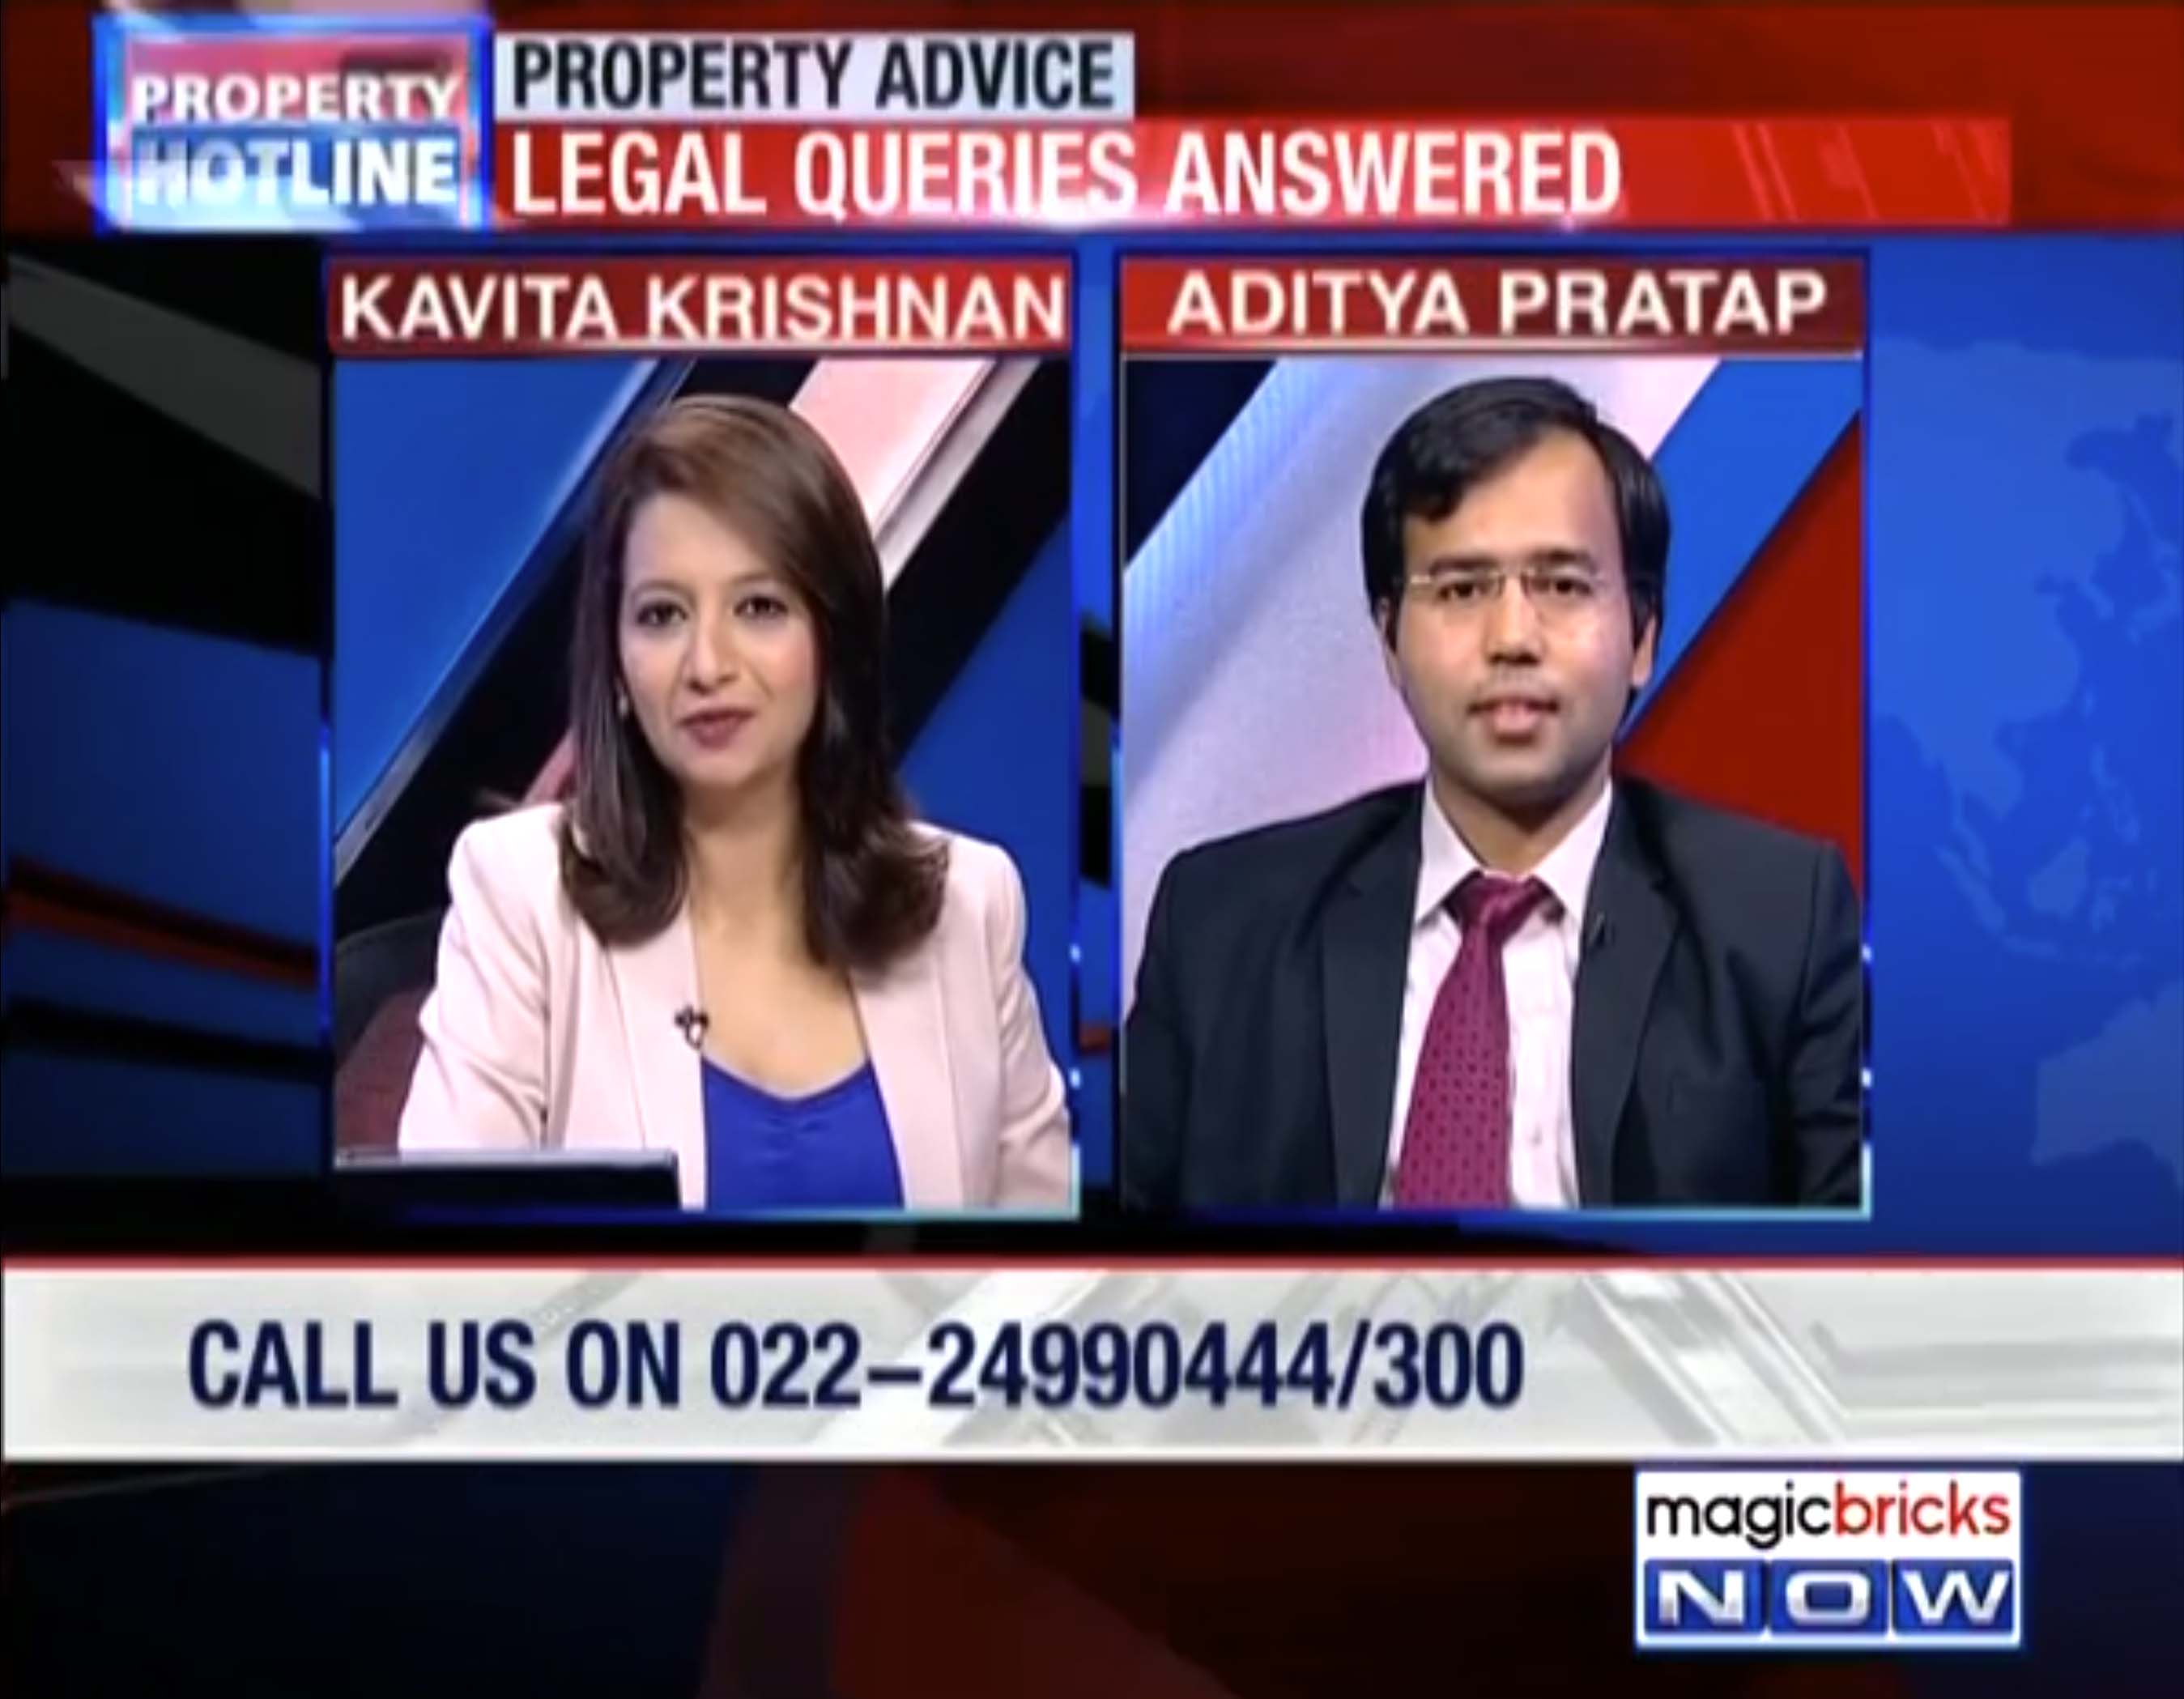 Legal queries answered with Aditya Pratap – March 21– Property Hotline